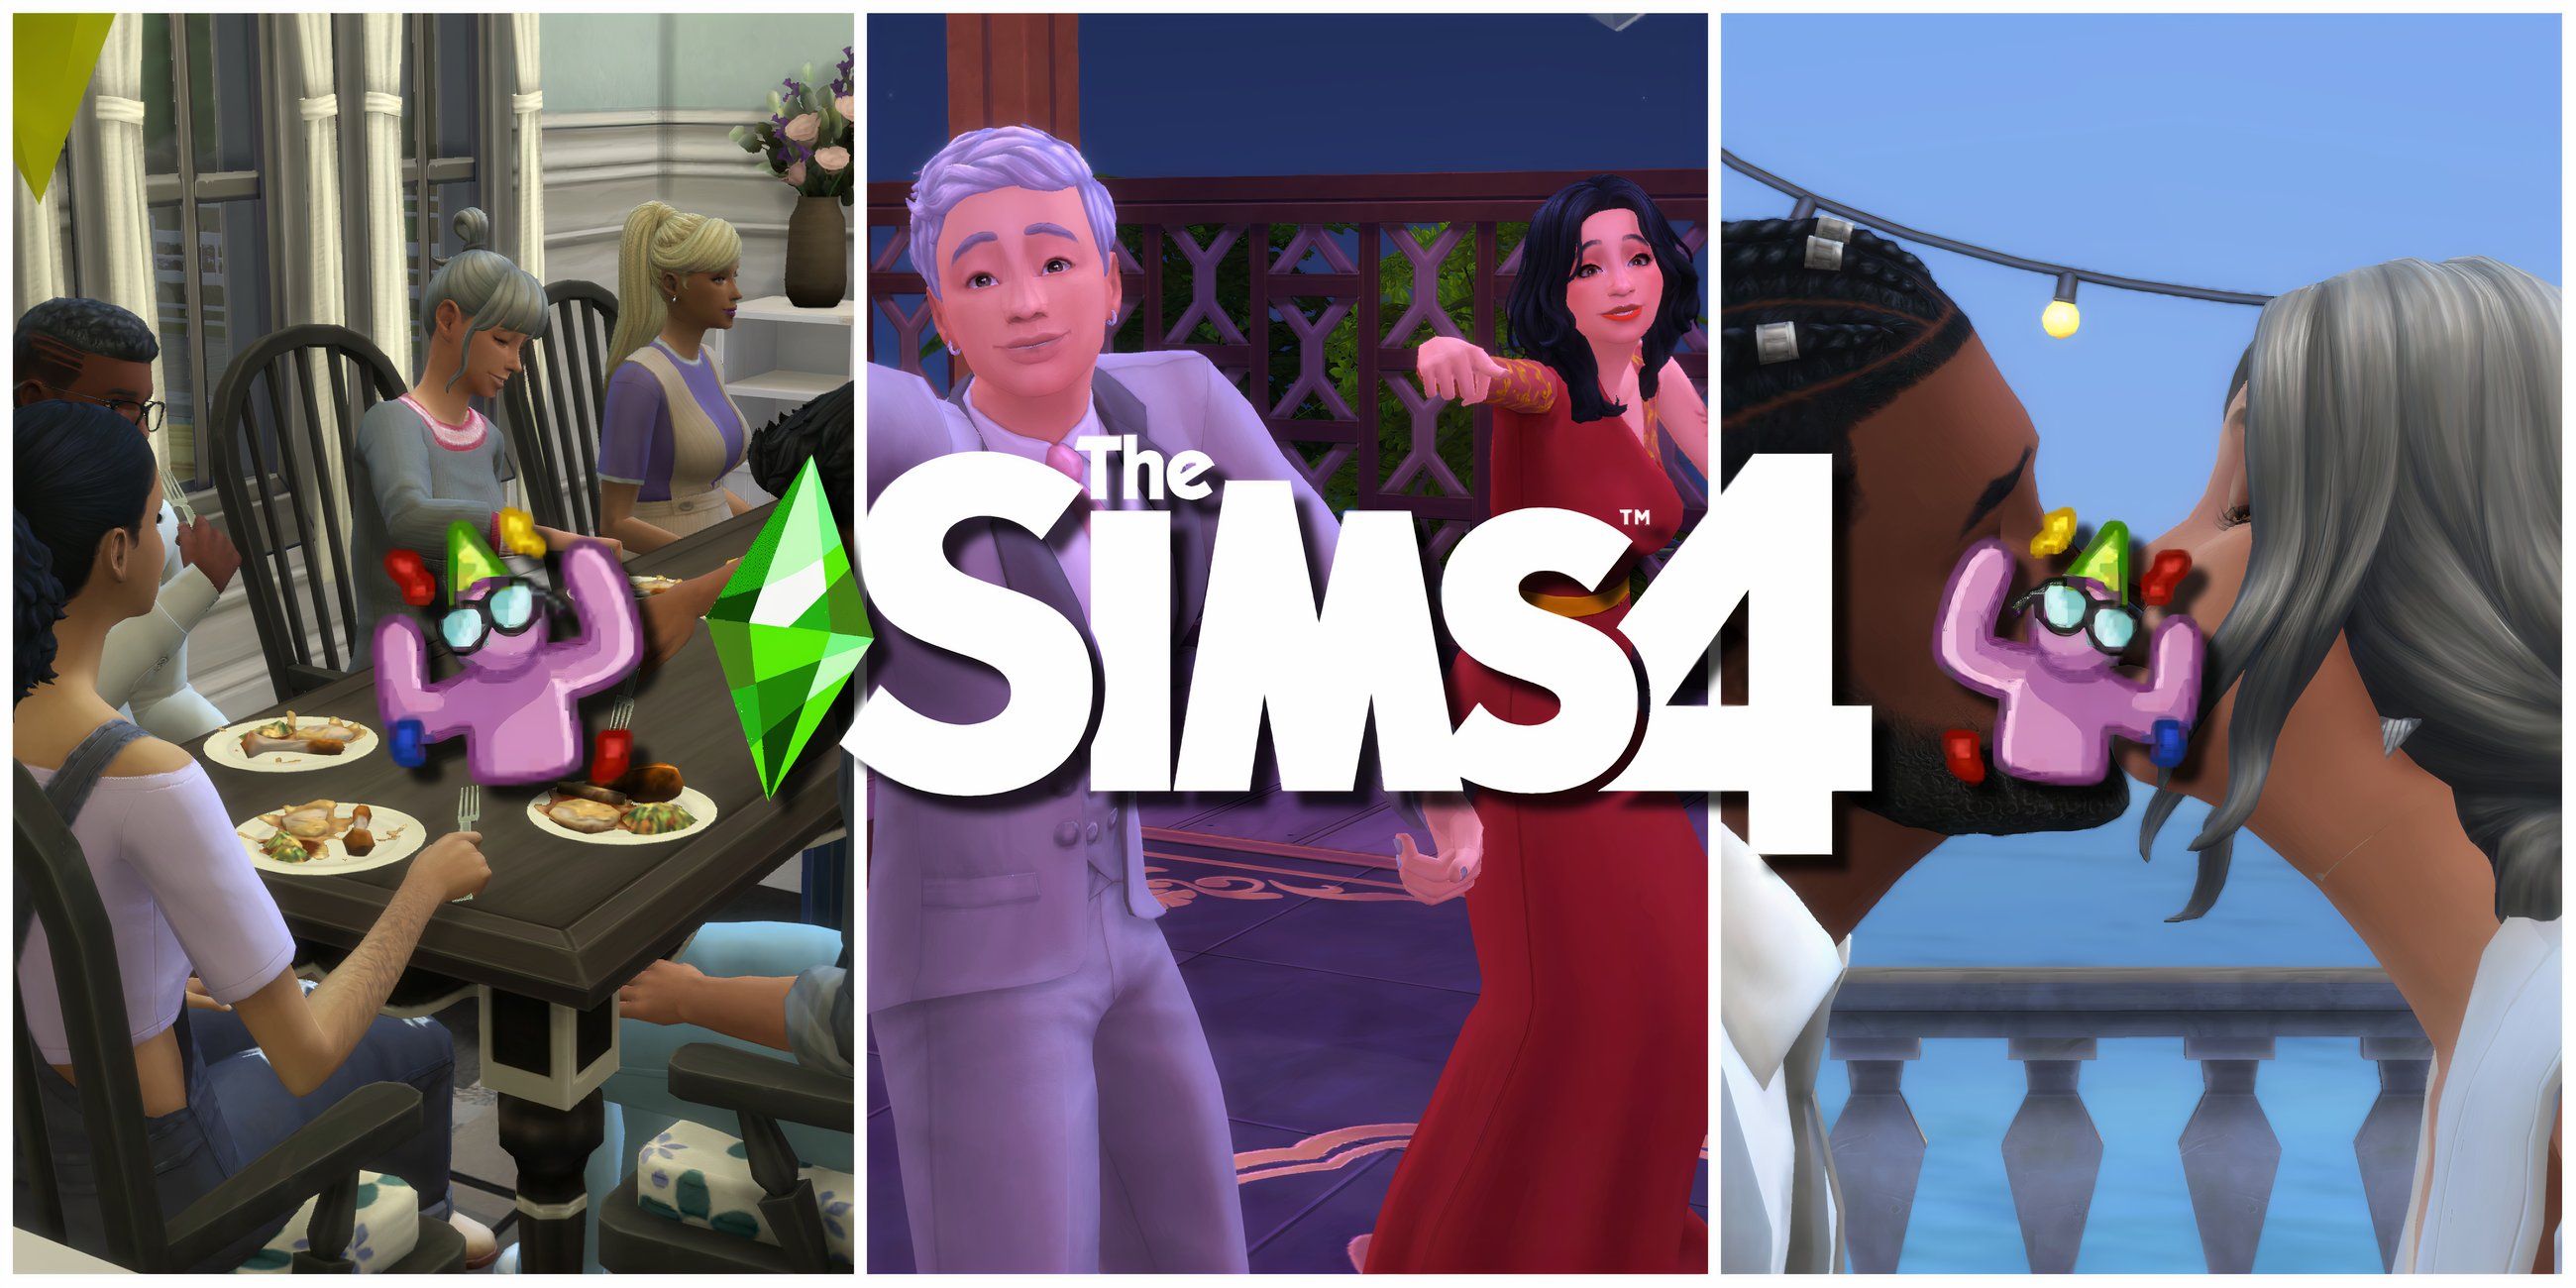 Sims at parties having fun thanks to helpful mods that enhance the partygoing experience